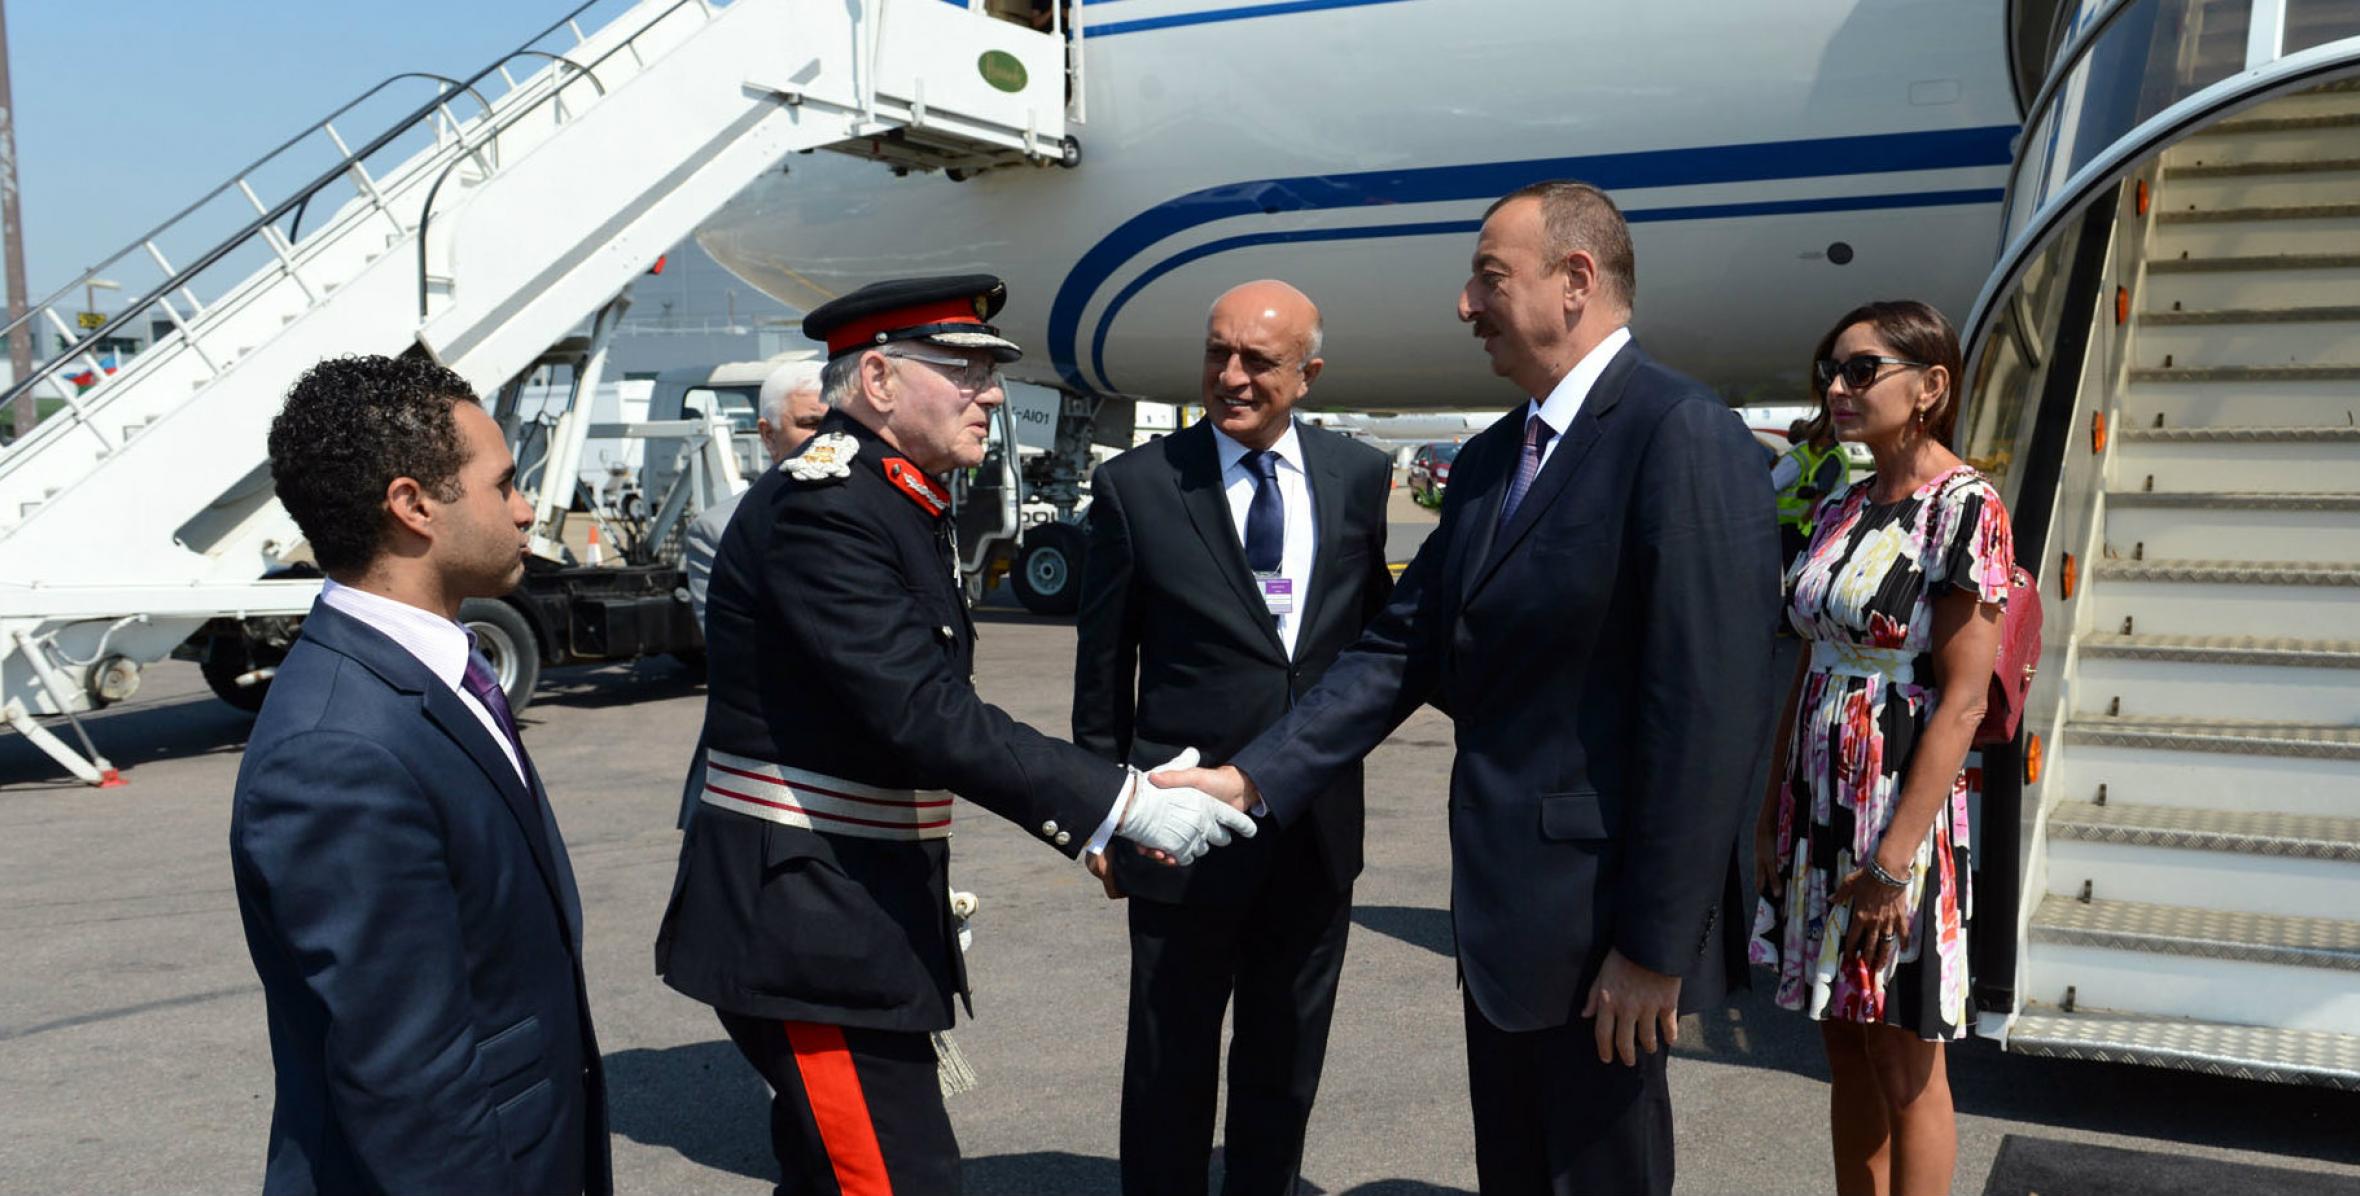 Ilham Aliyev arrived in London, the venue of the 30th Summer Olympic Games